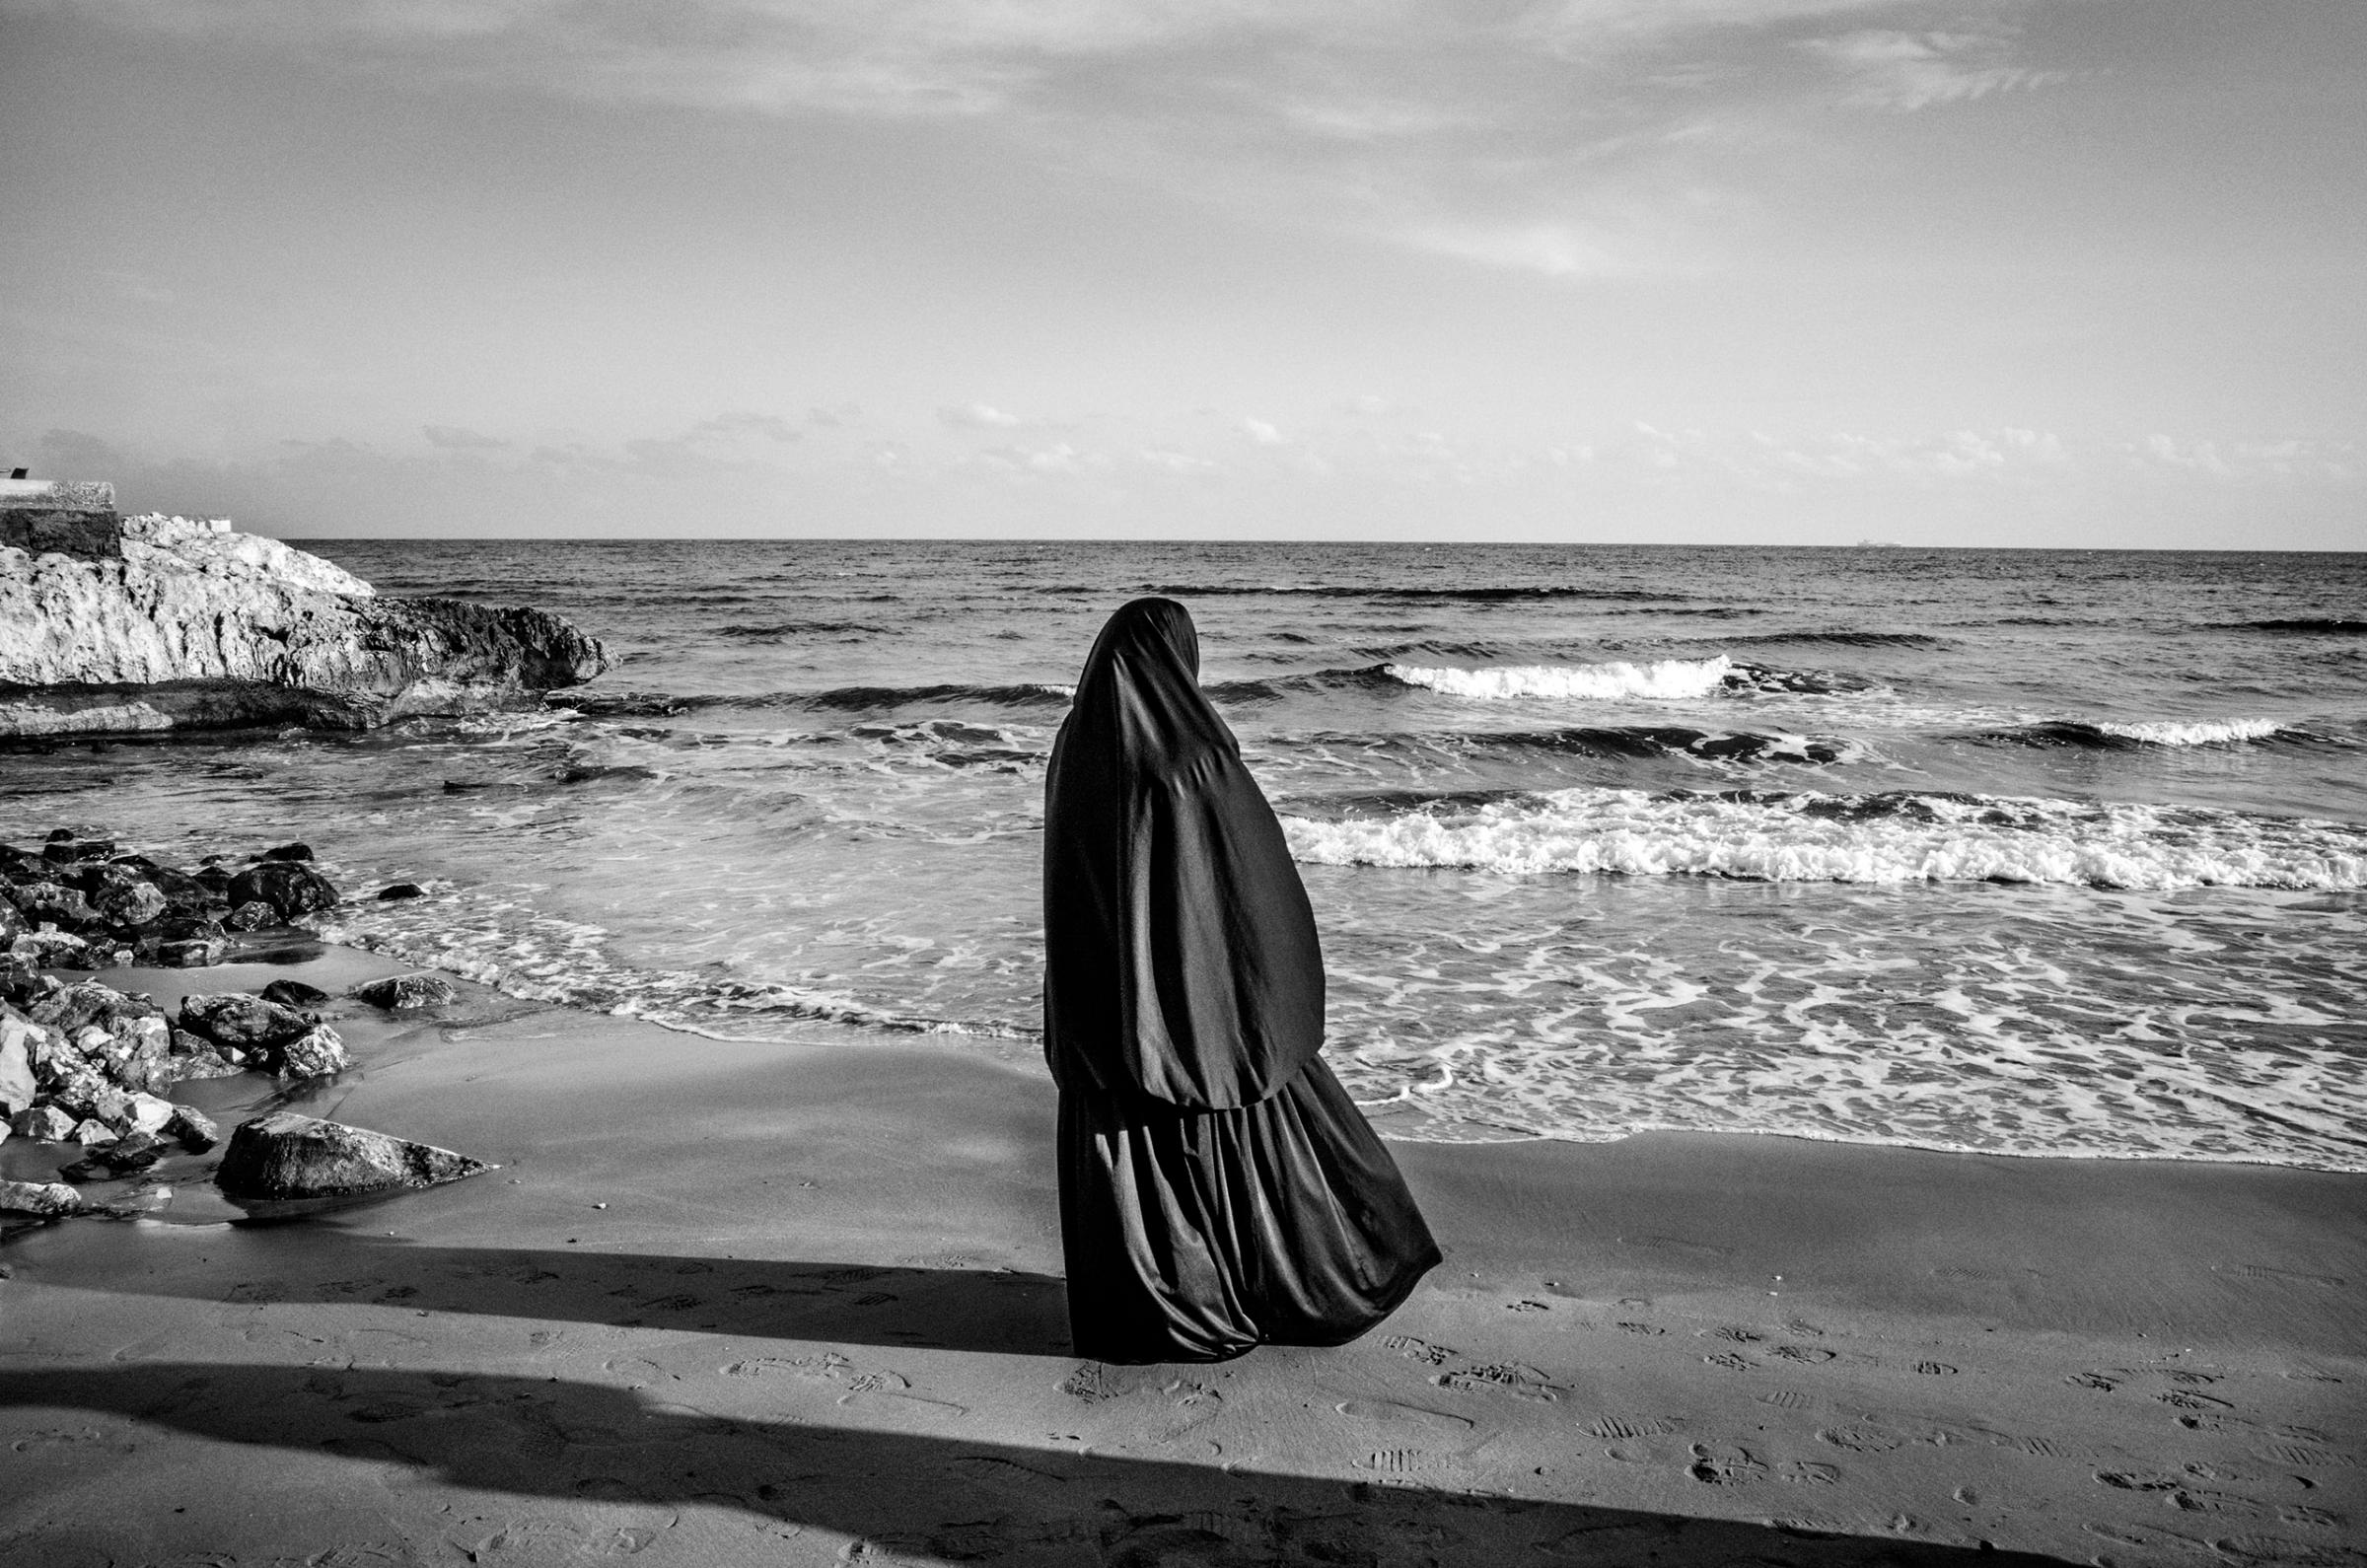 A Syrian woman looks at the sea in Kizkalesi, Turkey, while waiting to board a ship heading further north in Europe, Jan. 29, 2015. More than 3,000 refugees and migrants drowned in the Mediterranean in 2014 fleeing conflict-torn regions, and more than 3,700 died in 2015.